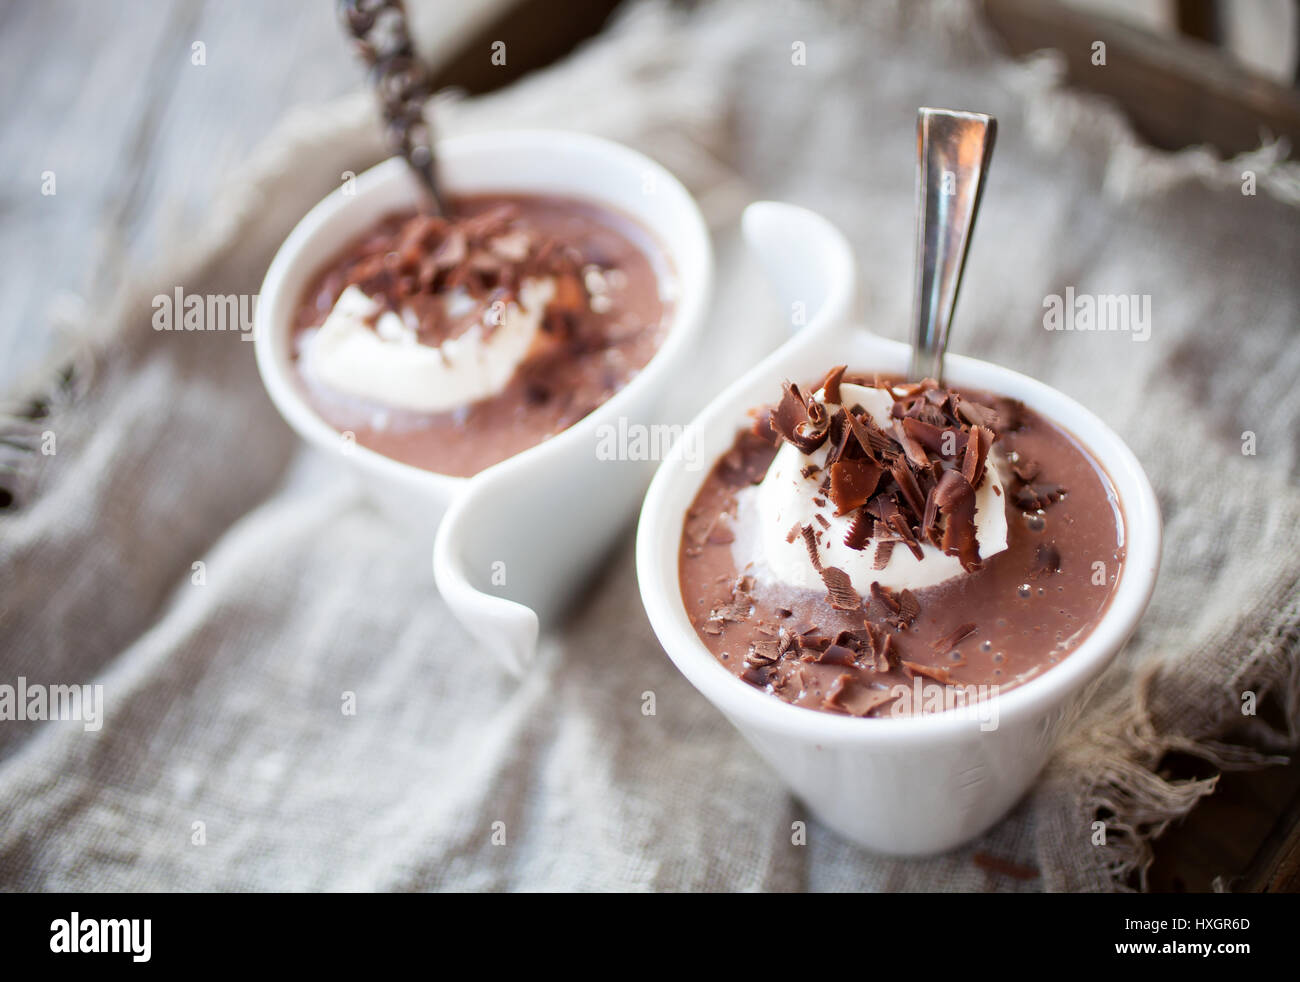 Chocolate pudding with whipped cream and chocolate Stock Photo